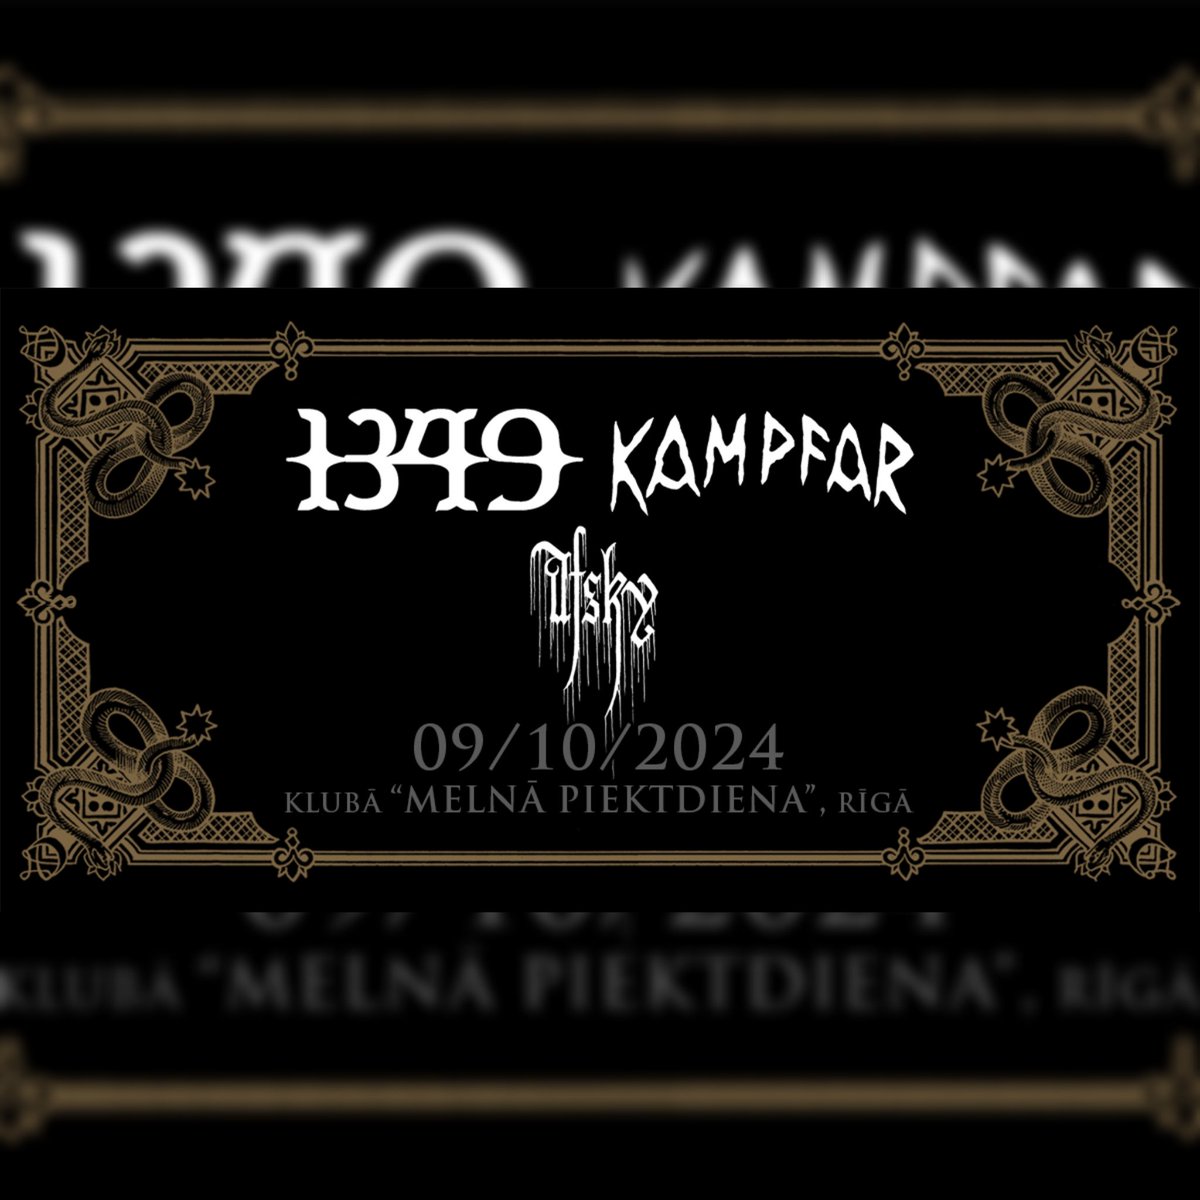 AURAL HELLFIRE ARRIVES IN RIGA ON OCTOBER 9TH. @1349official and @Norsepagans, along with @afskyofficial, continue their European Tour at @MelnaPiektdiena on October 9th. Tickets: ticketshop.lv/lv/events/6098 DO NOT MISS IT. #legion1349 #auralhellfire #kampfar #afsky #riga